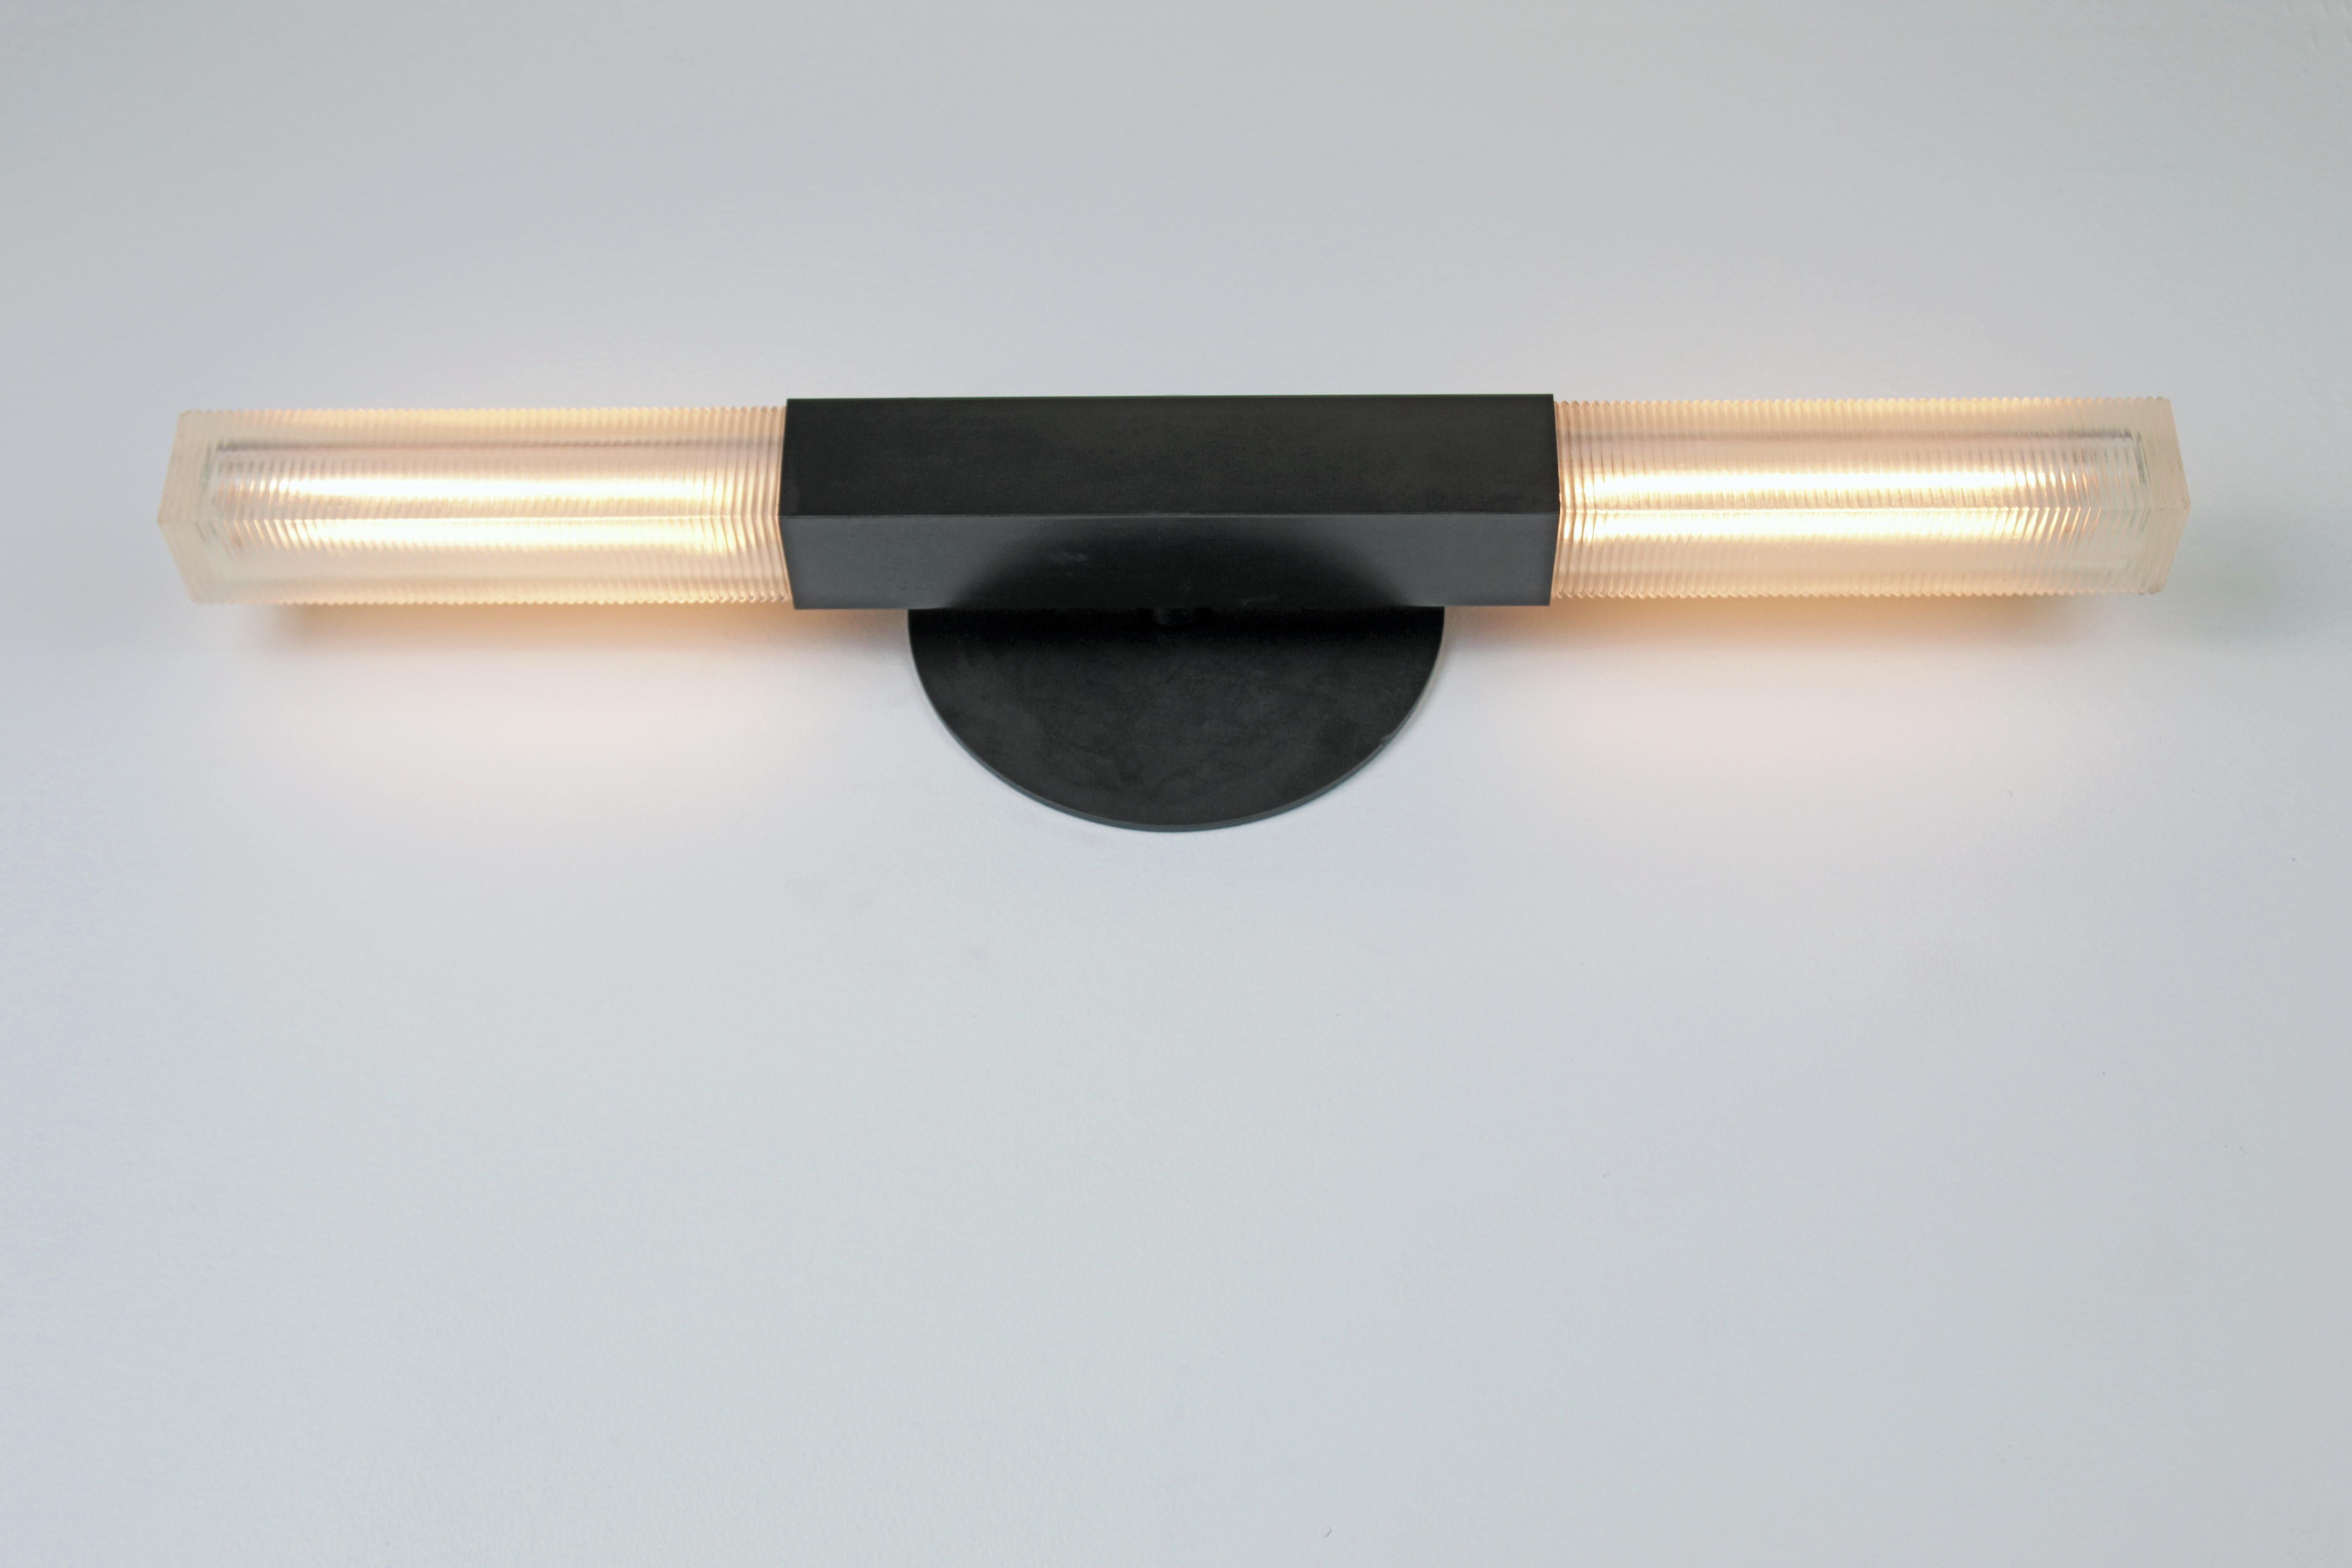 Daikon Studio  POST  Duo Sconce 

The Duo Sconce celebrates the poetic dialogue between light and form to create a fixture that leans into the timeless and iconic. Meticulously crafted by hand in our studios. Horizontal or vertical